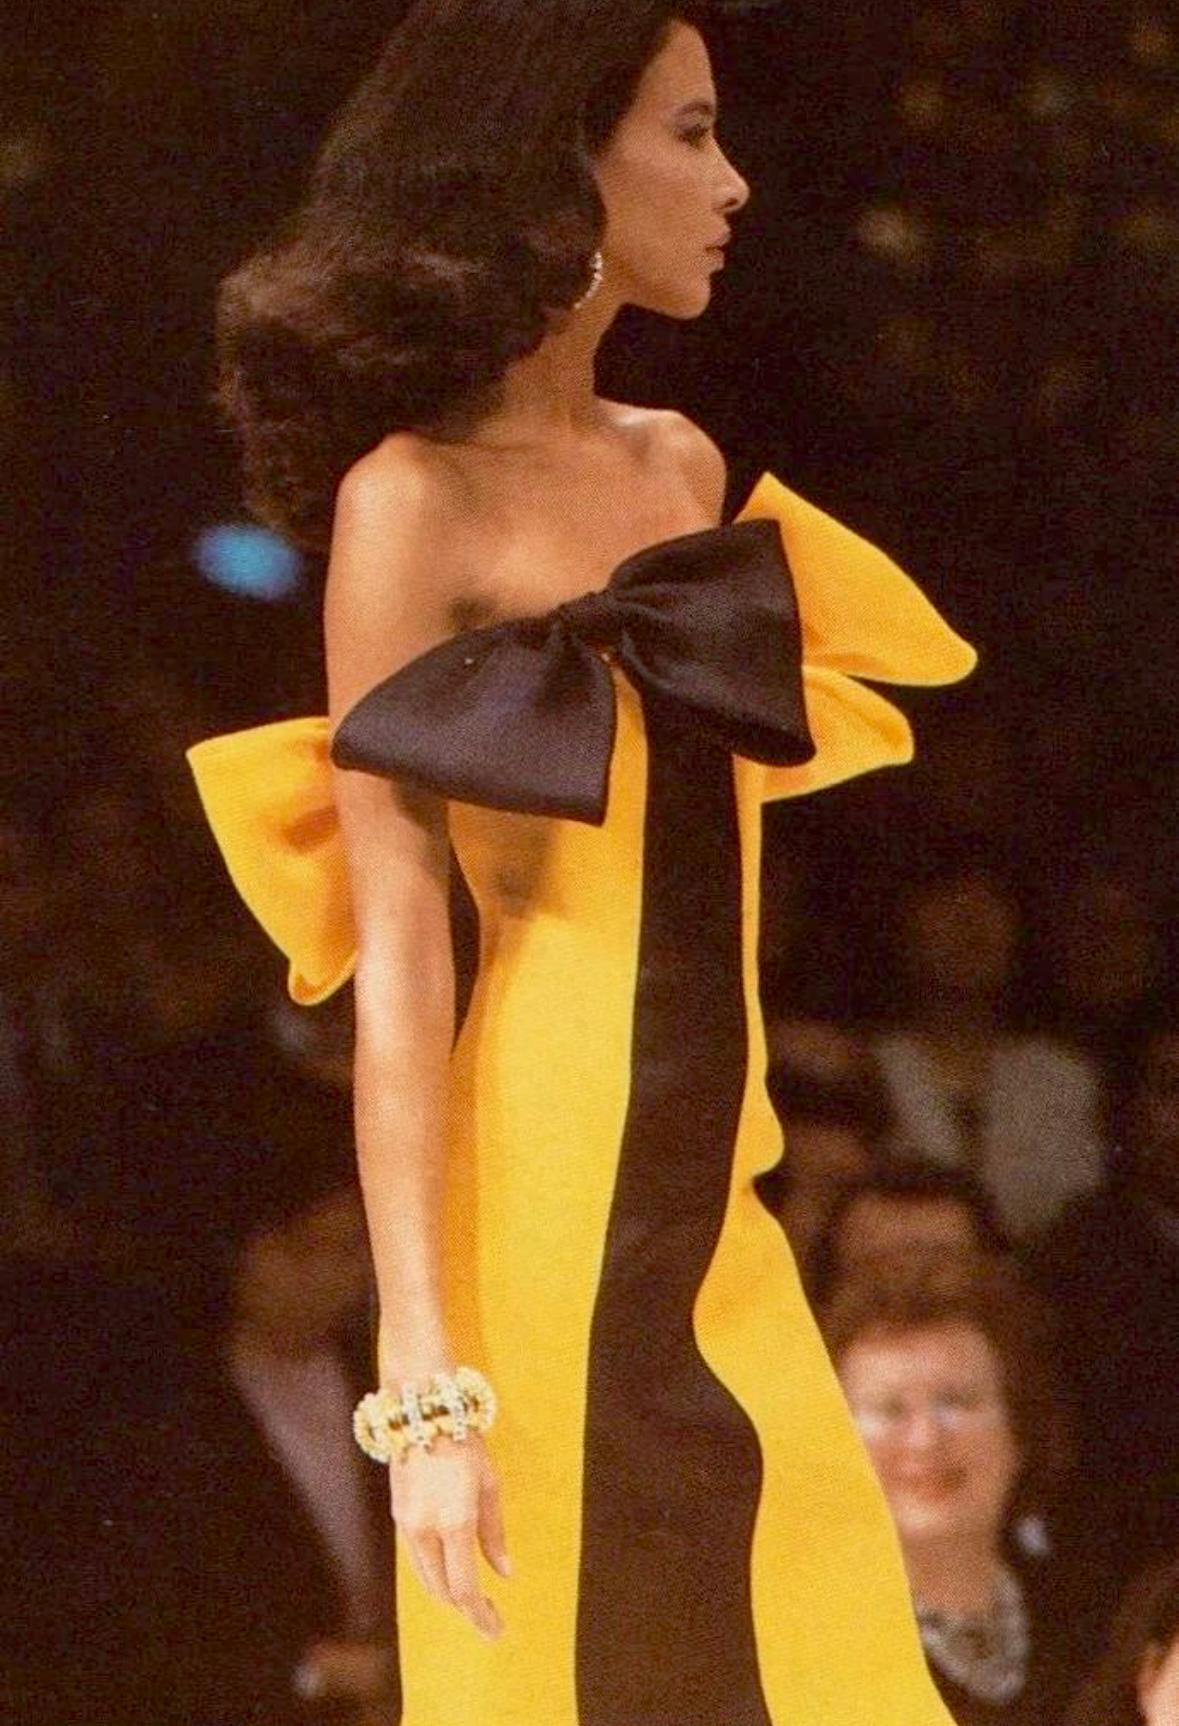 Presenting an incredible yellow and black Givenchy Haute Couture gown, designed by one of the masters of 20th century Haute Couture, Hubert de Givenchy. From the Spring/Summer 1987 Haute Couture collection, this hourglass-shaped dress debuted on the